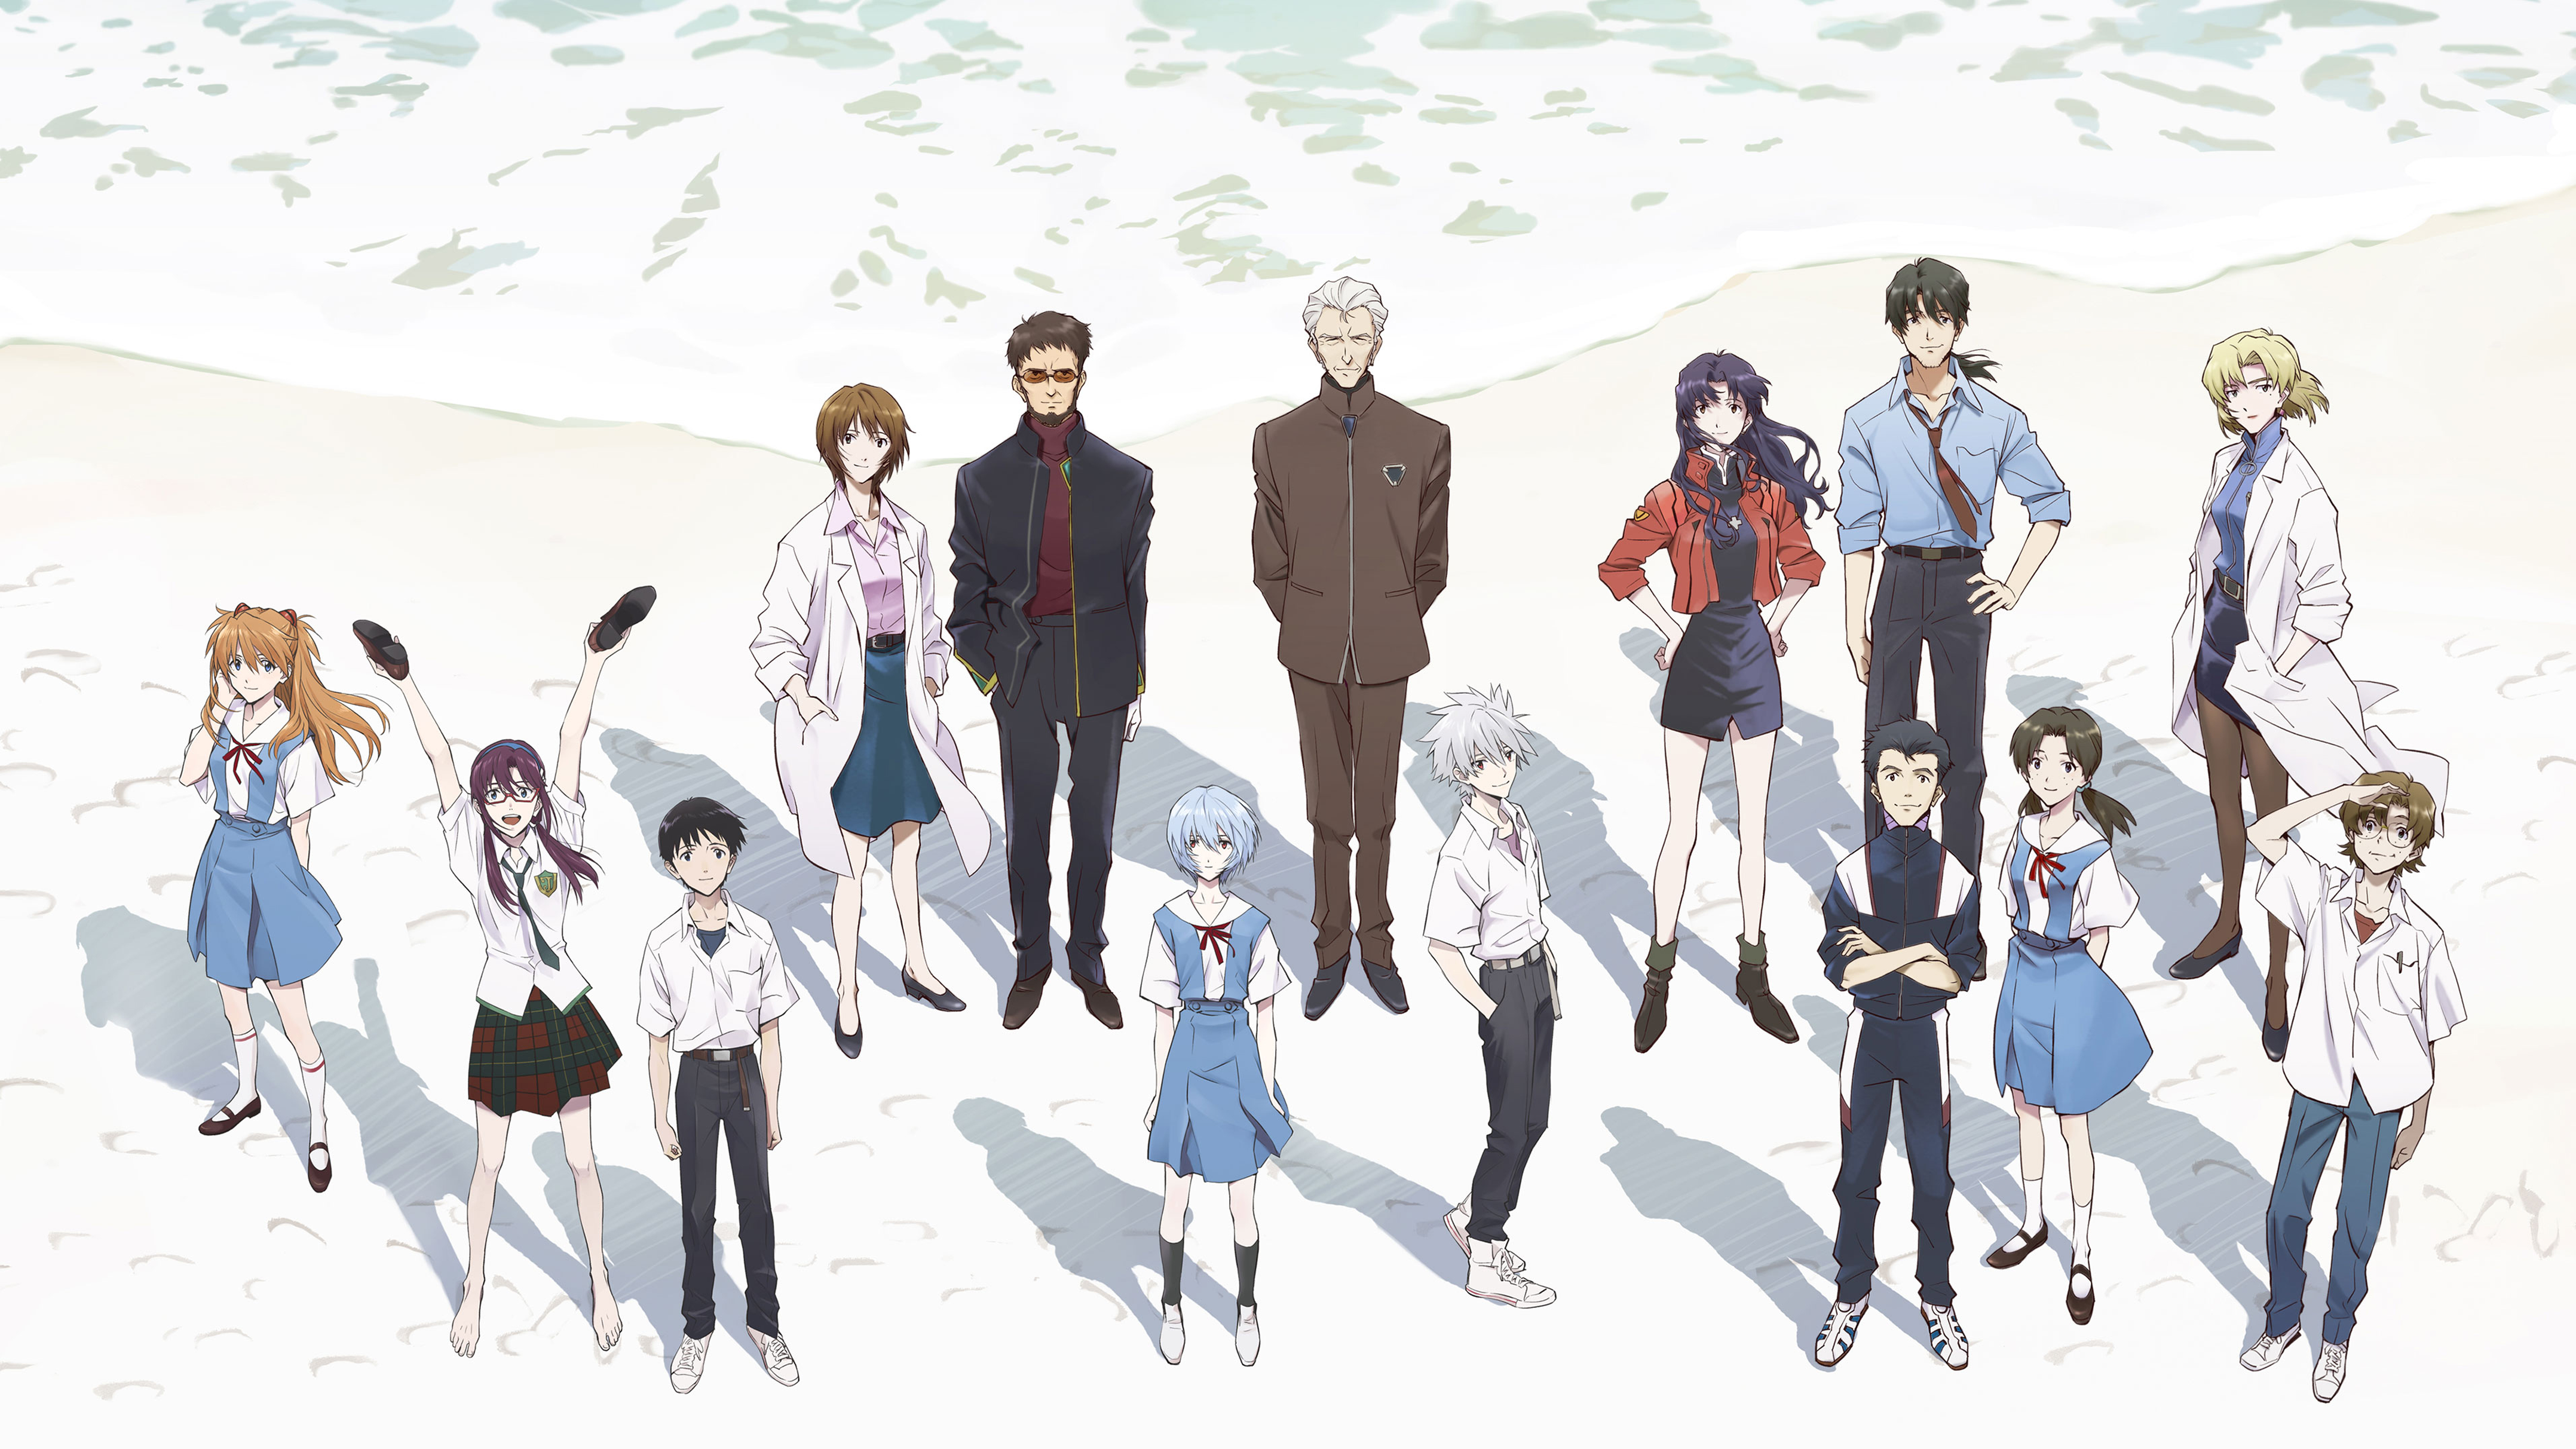 Anime 4311x2425 Neon Genesis Evangelion Evangelion: 3.0 + 1.0 Thrice Upon a Time anime boys standing looking at viewer jacket lab coats anime girls schoolgirl school uniform schoolboys smiling closed mouth glasses open mouth long hair sand waves water